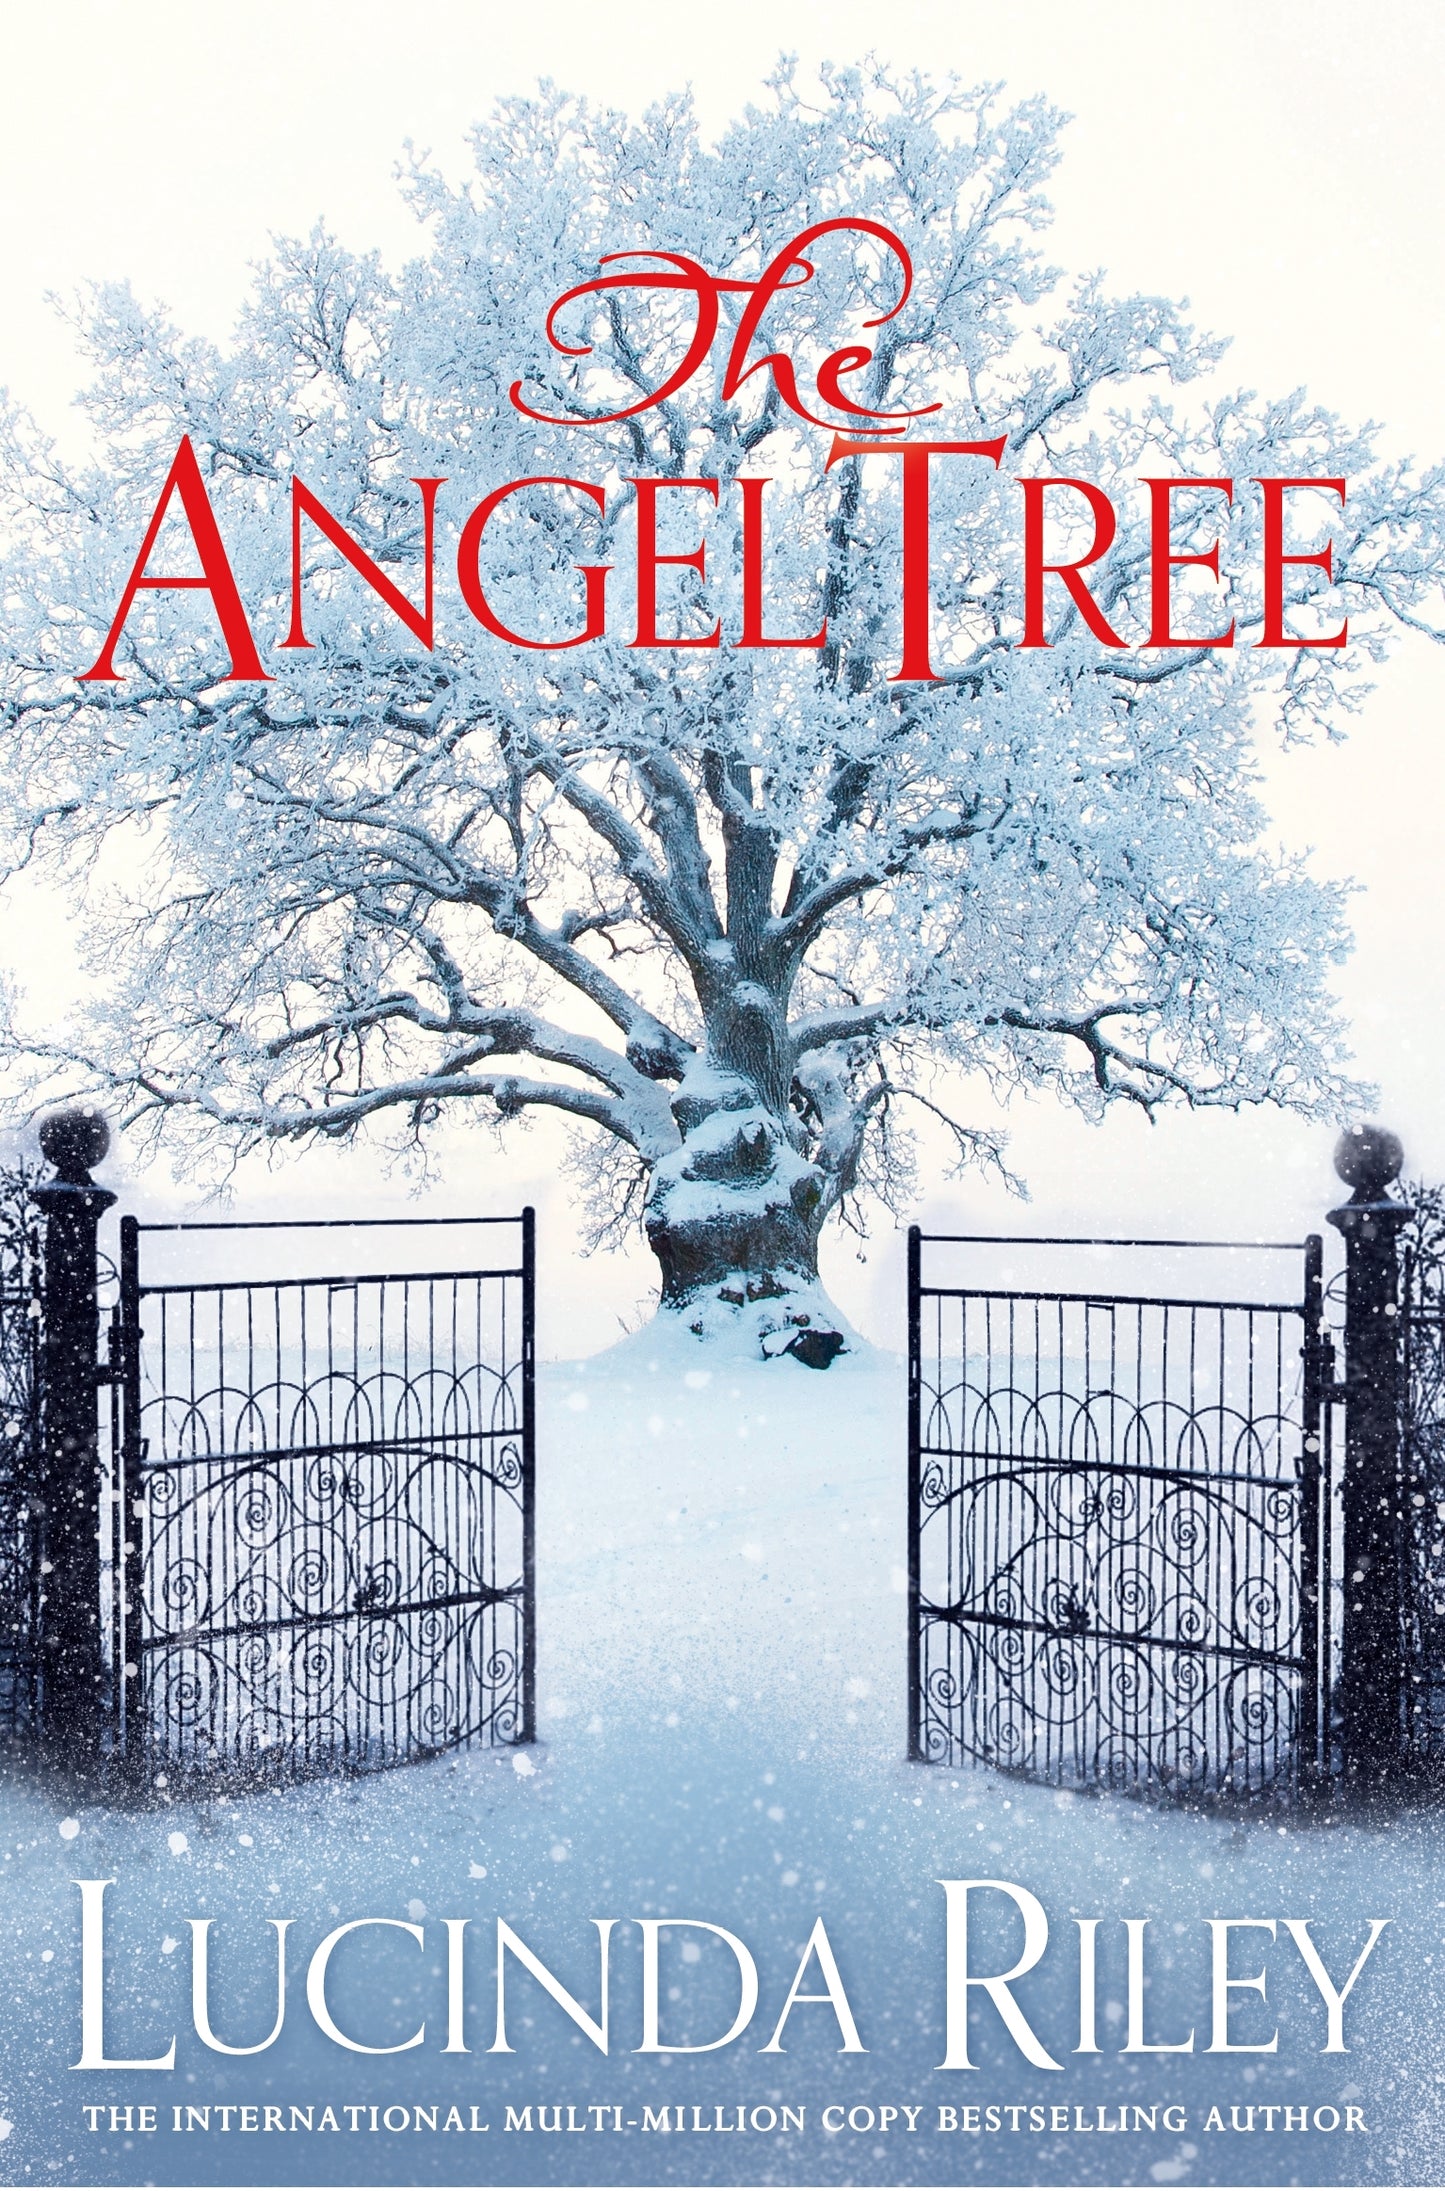 The Angel Tree by Lucinda Riley - City Books & Lotto